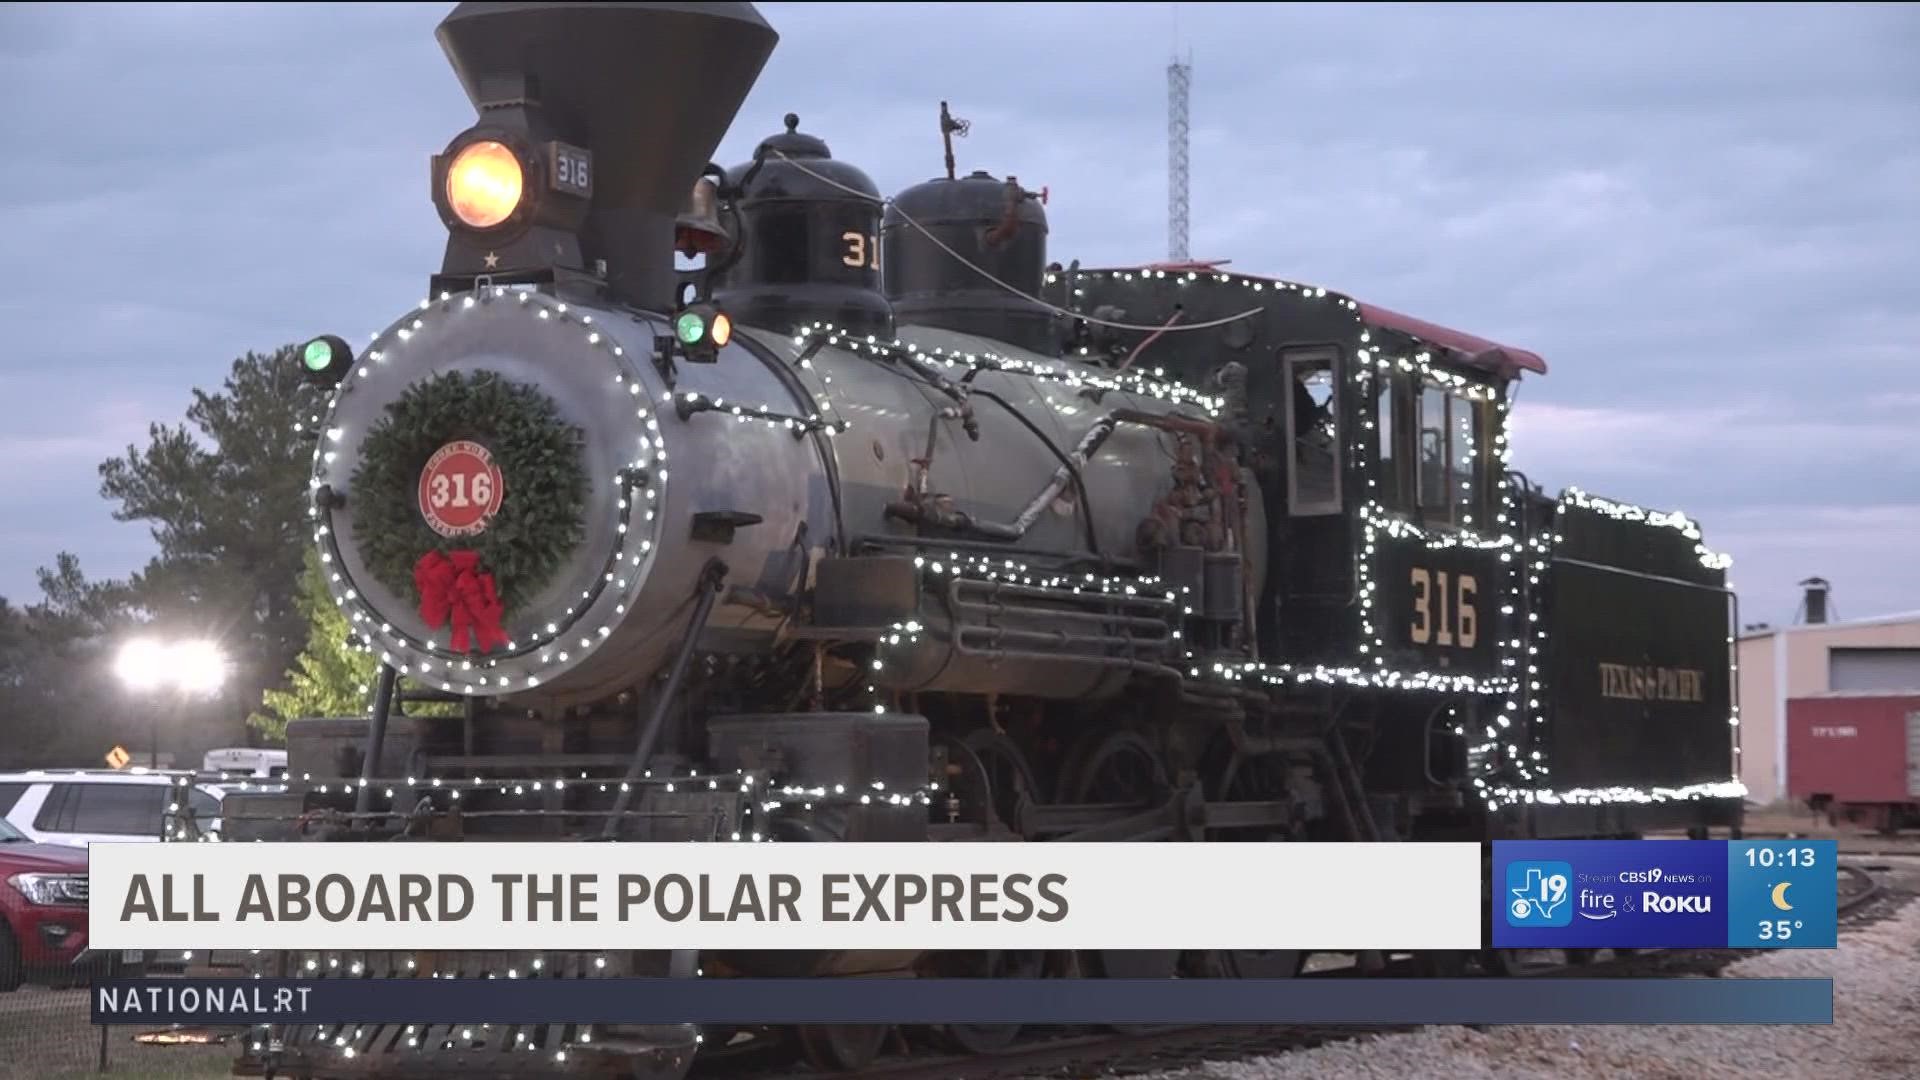 The Christmas train ride is based on Chris Van Allsburg's book turned motion picture, "The Polar Express"